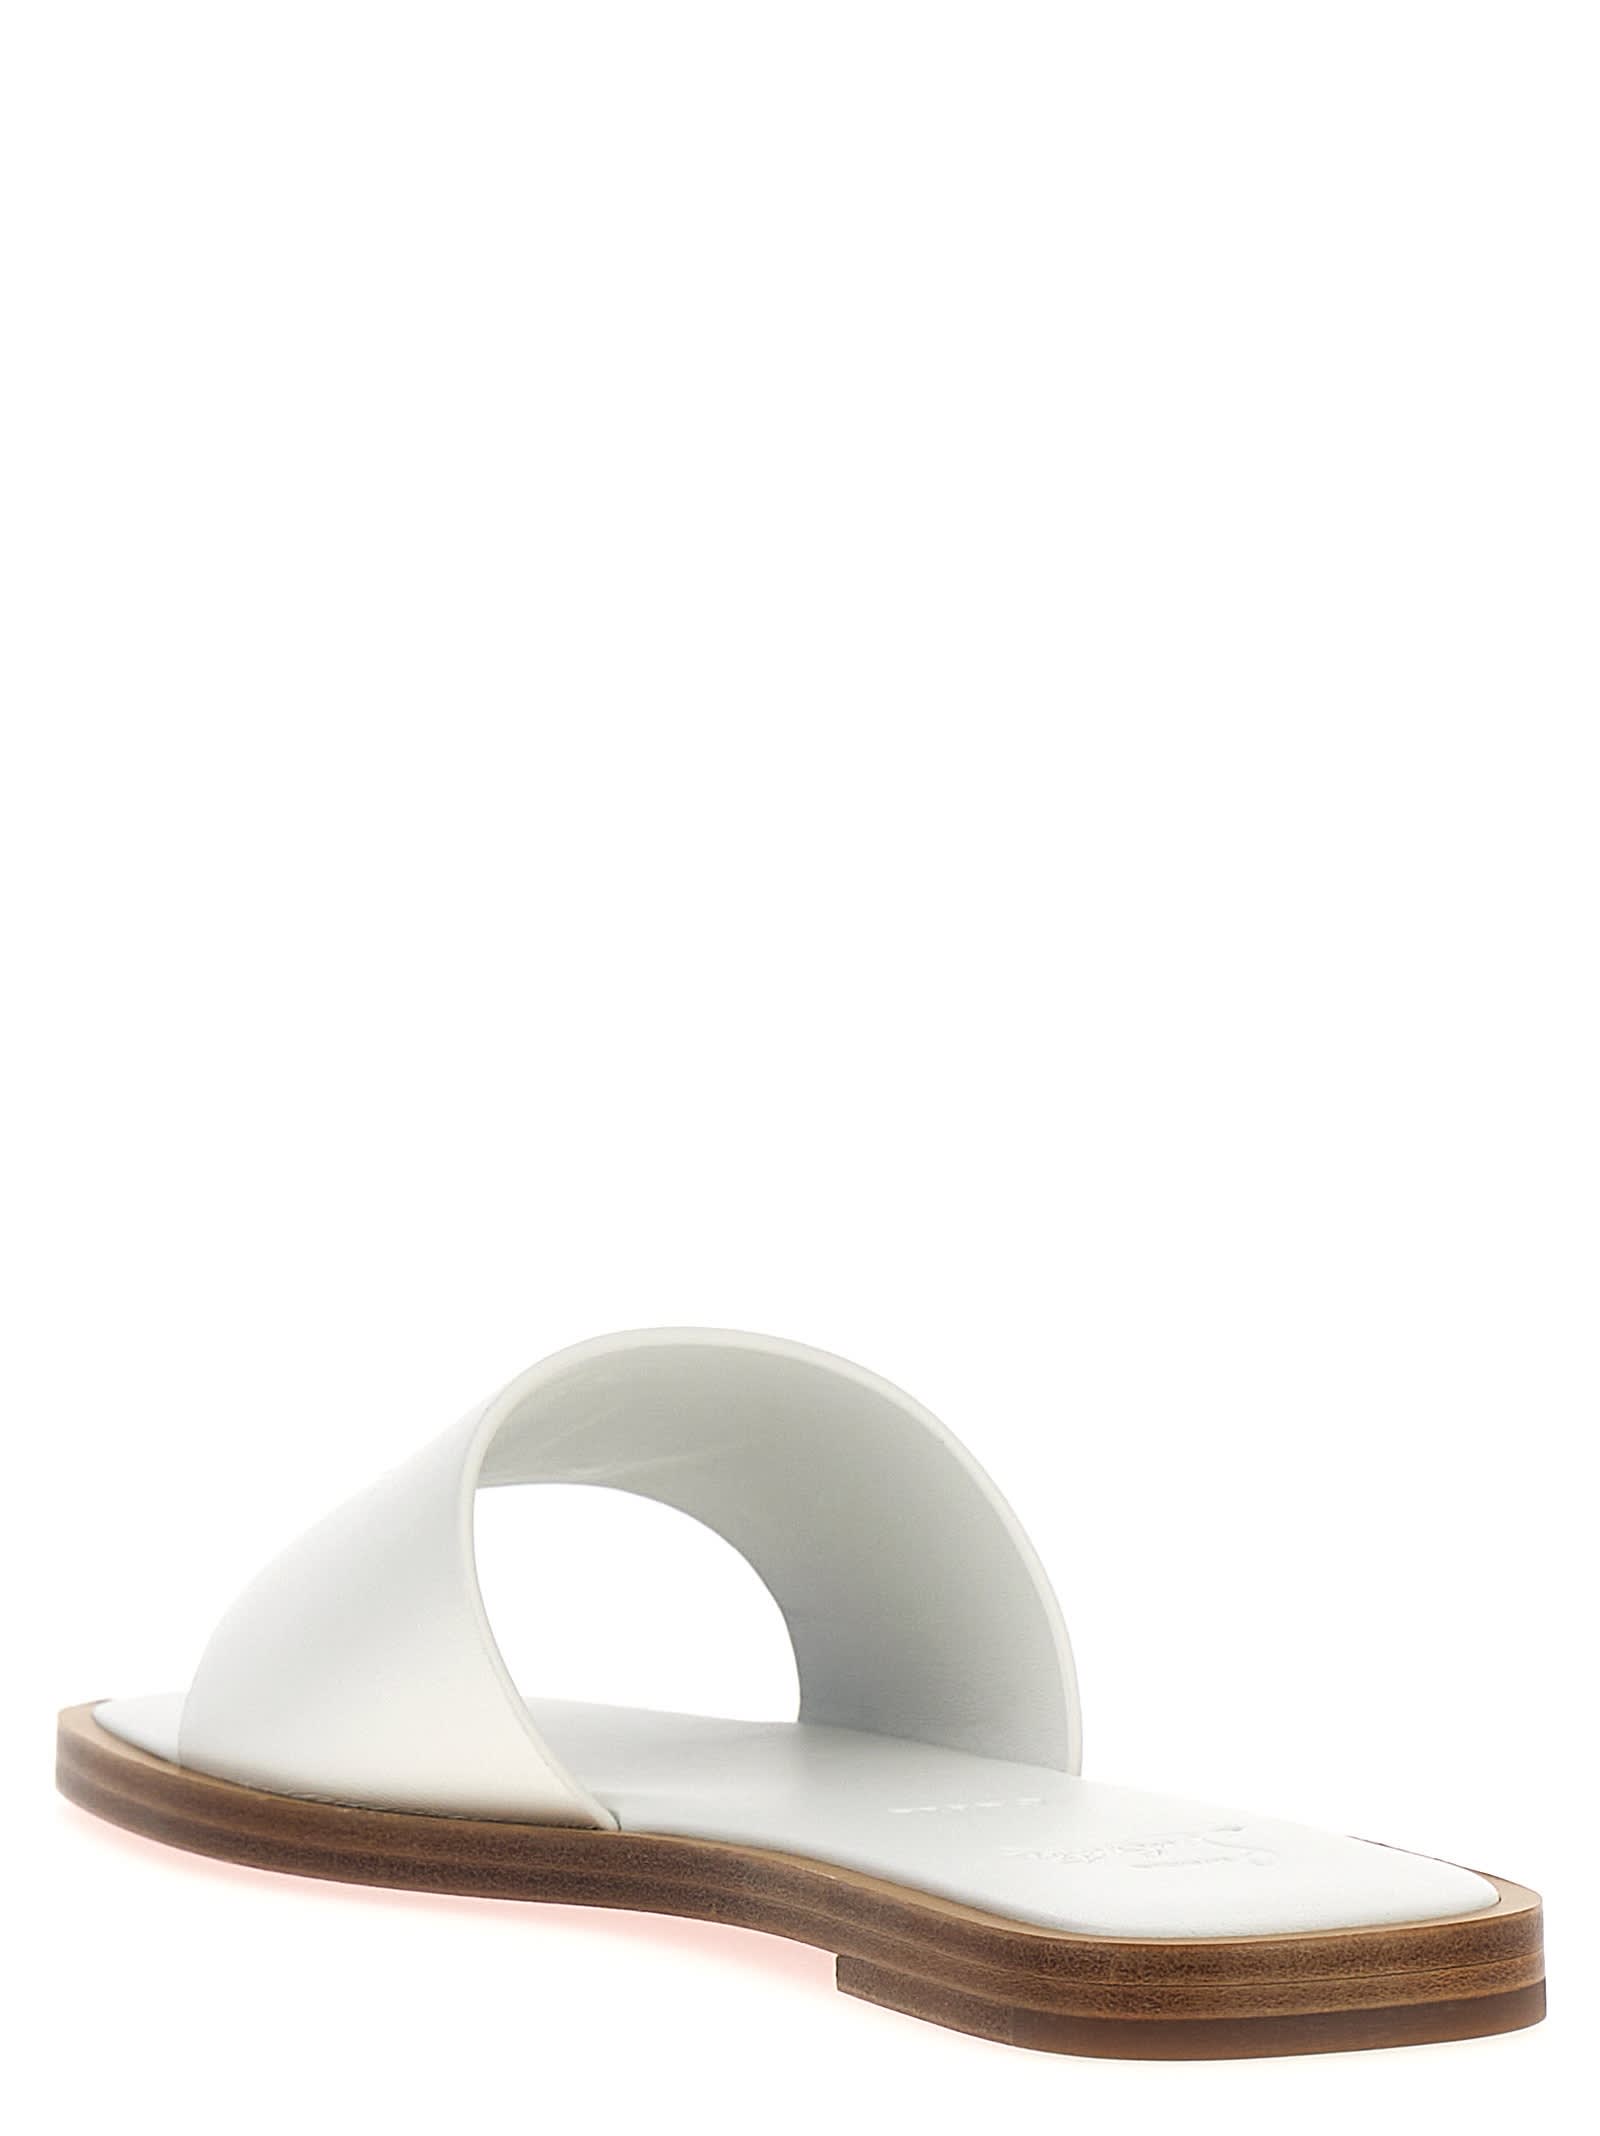 Shop Christian Louboutin Cl Mule Flat Sandals In White